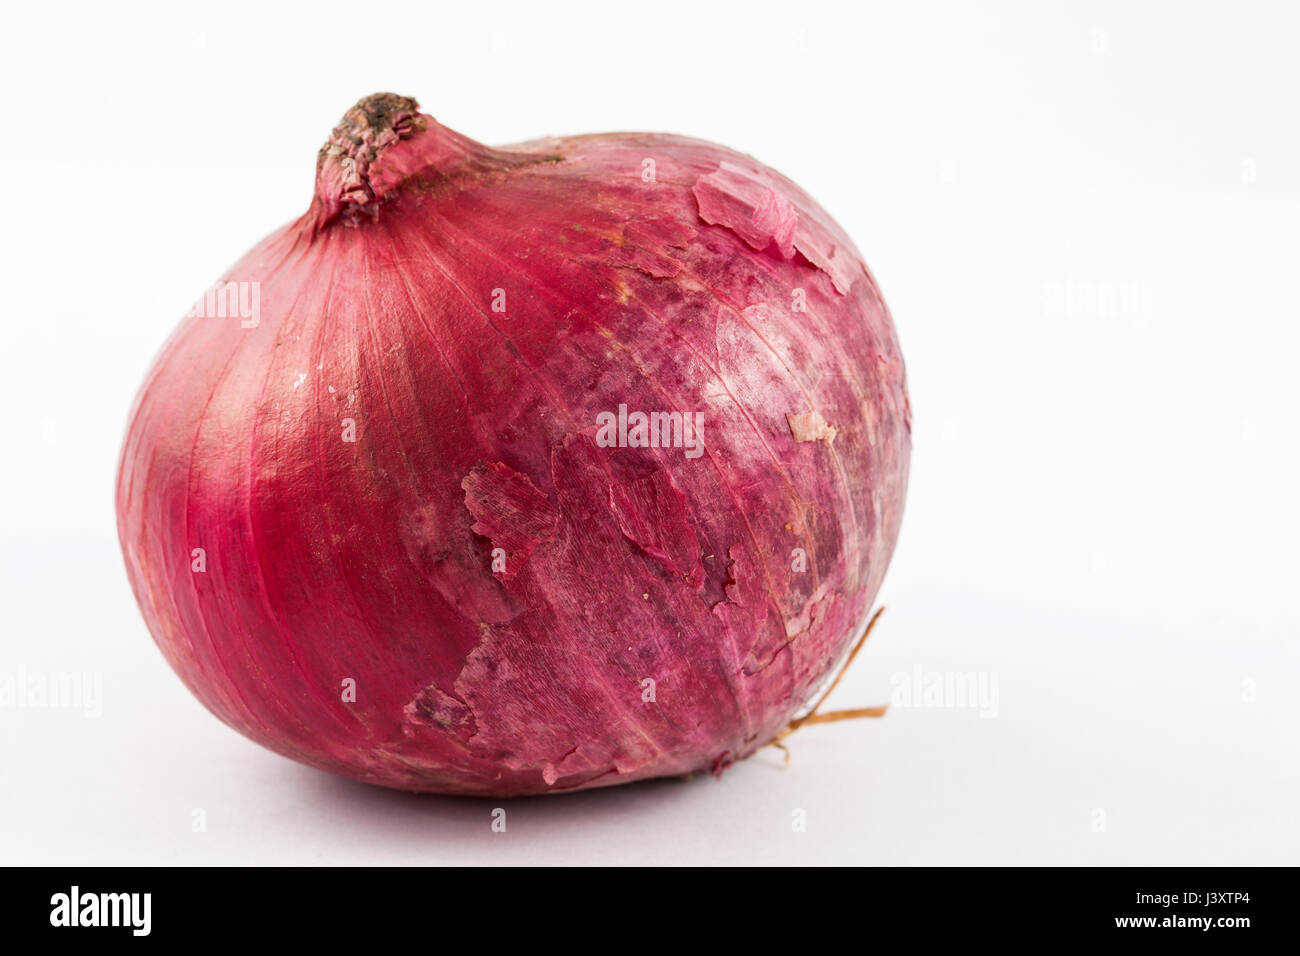 Red bulb onion (Allium cepa) isolated in white background Stock Photo